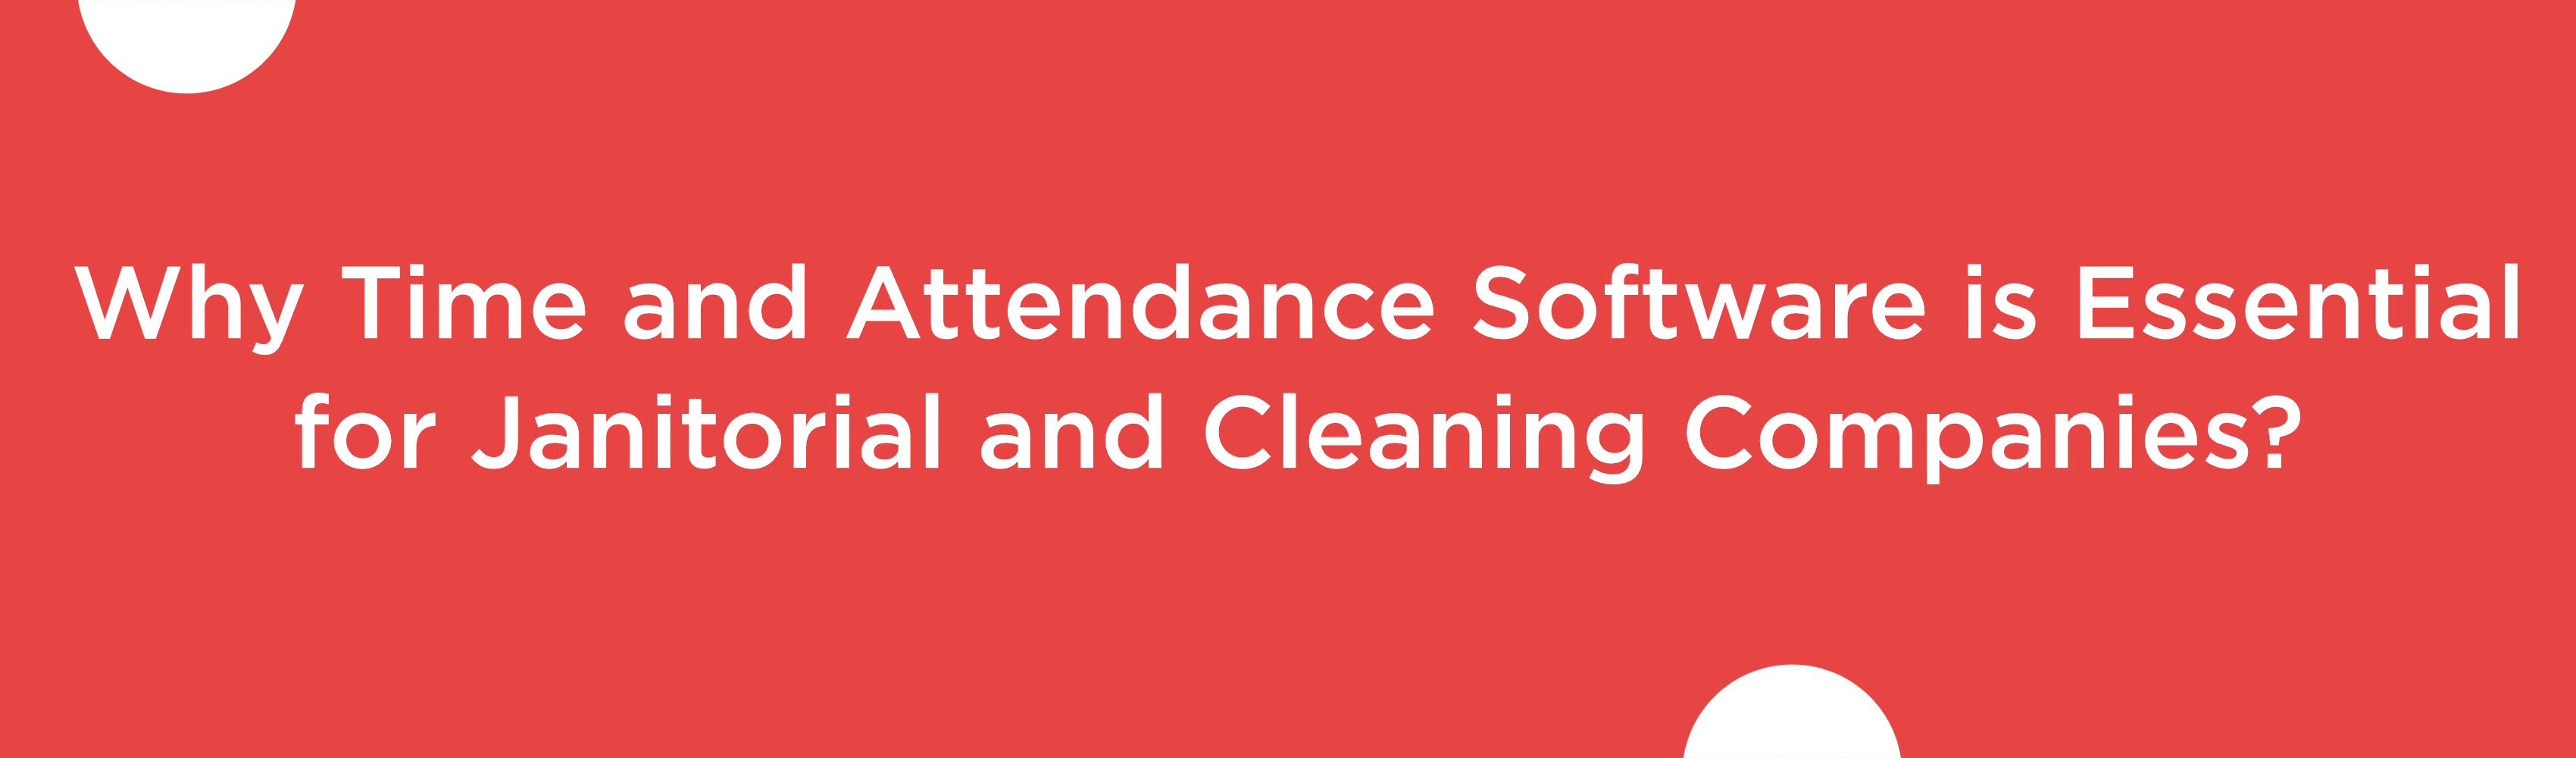 Why Time and Attendance Software is Essential for Janitorial and Cleaning Companies?